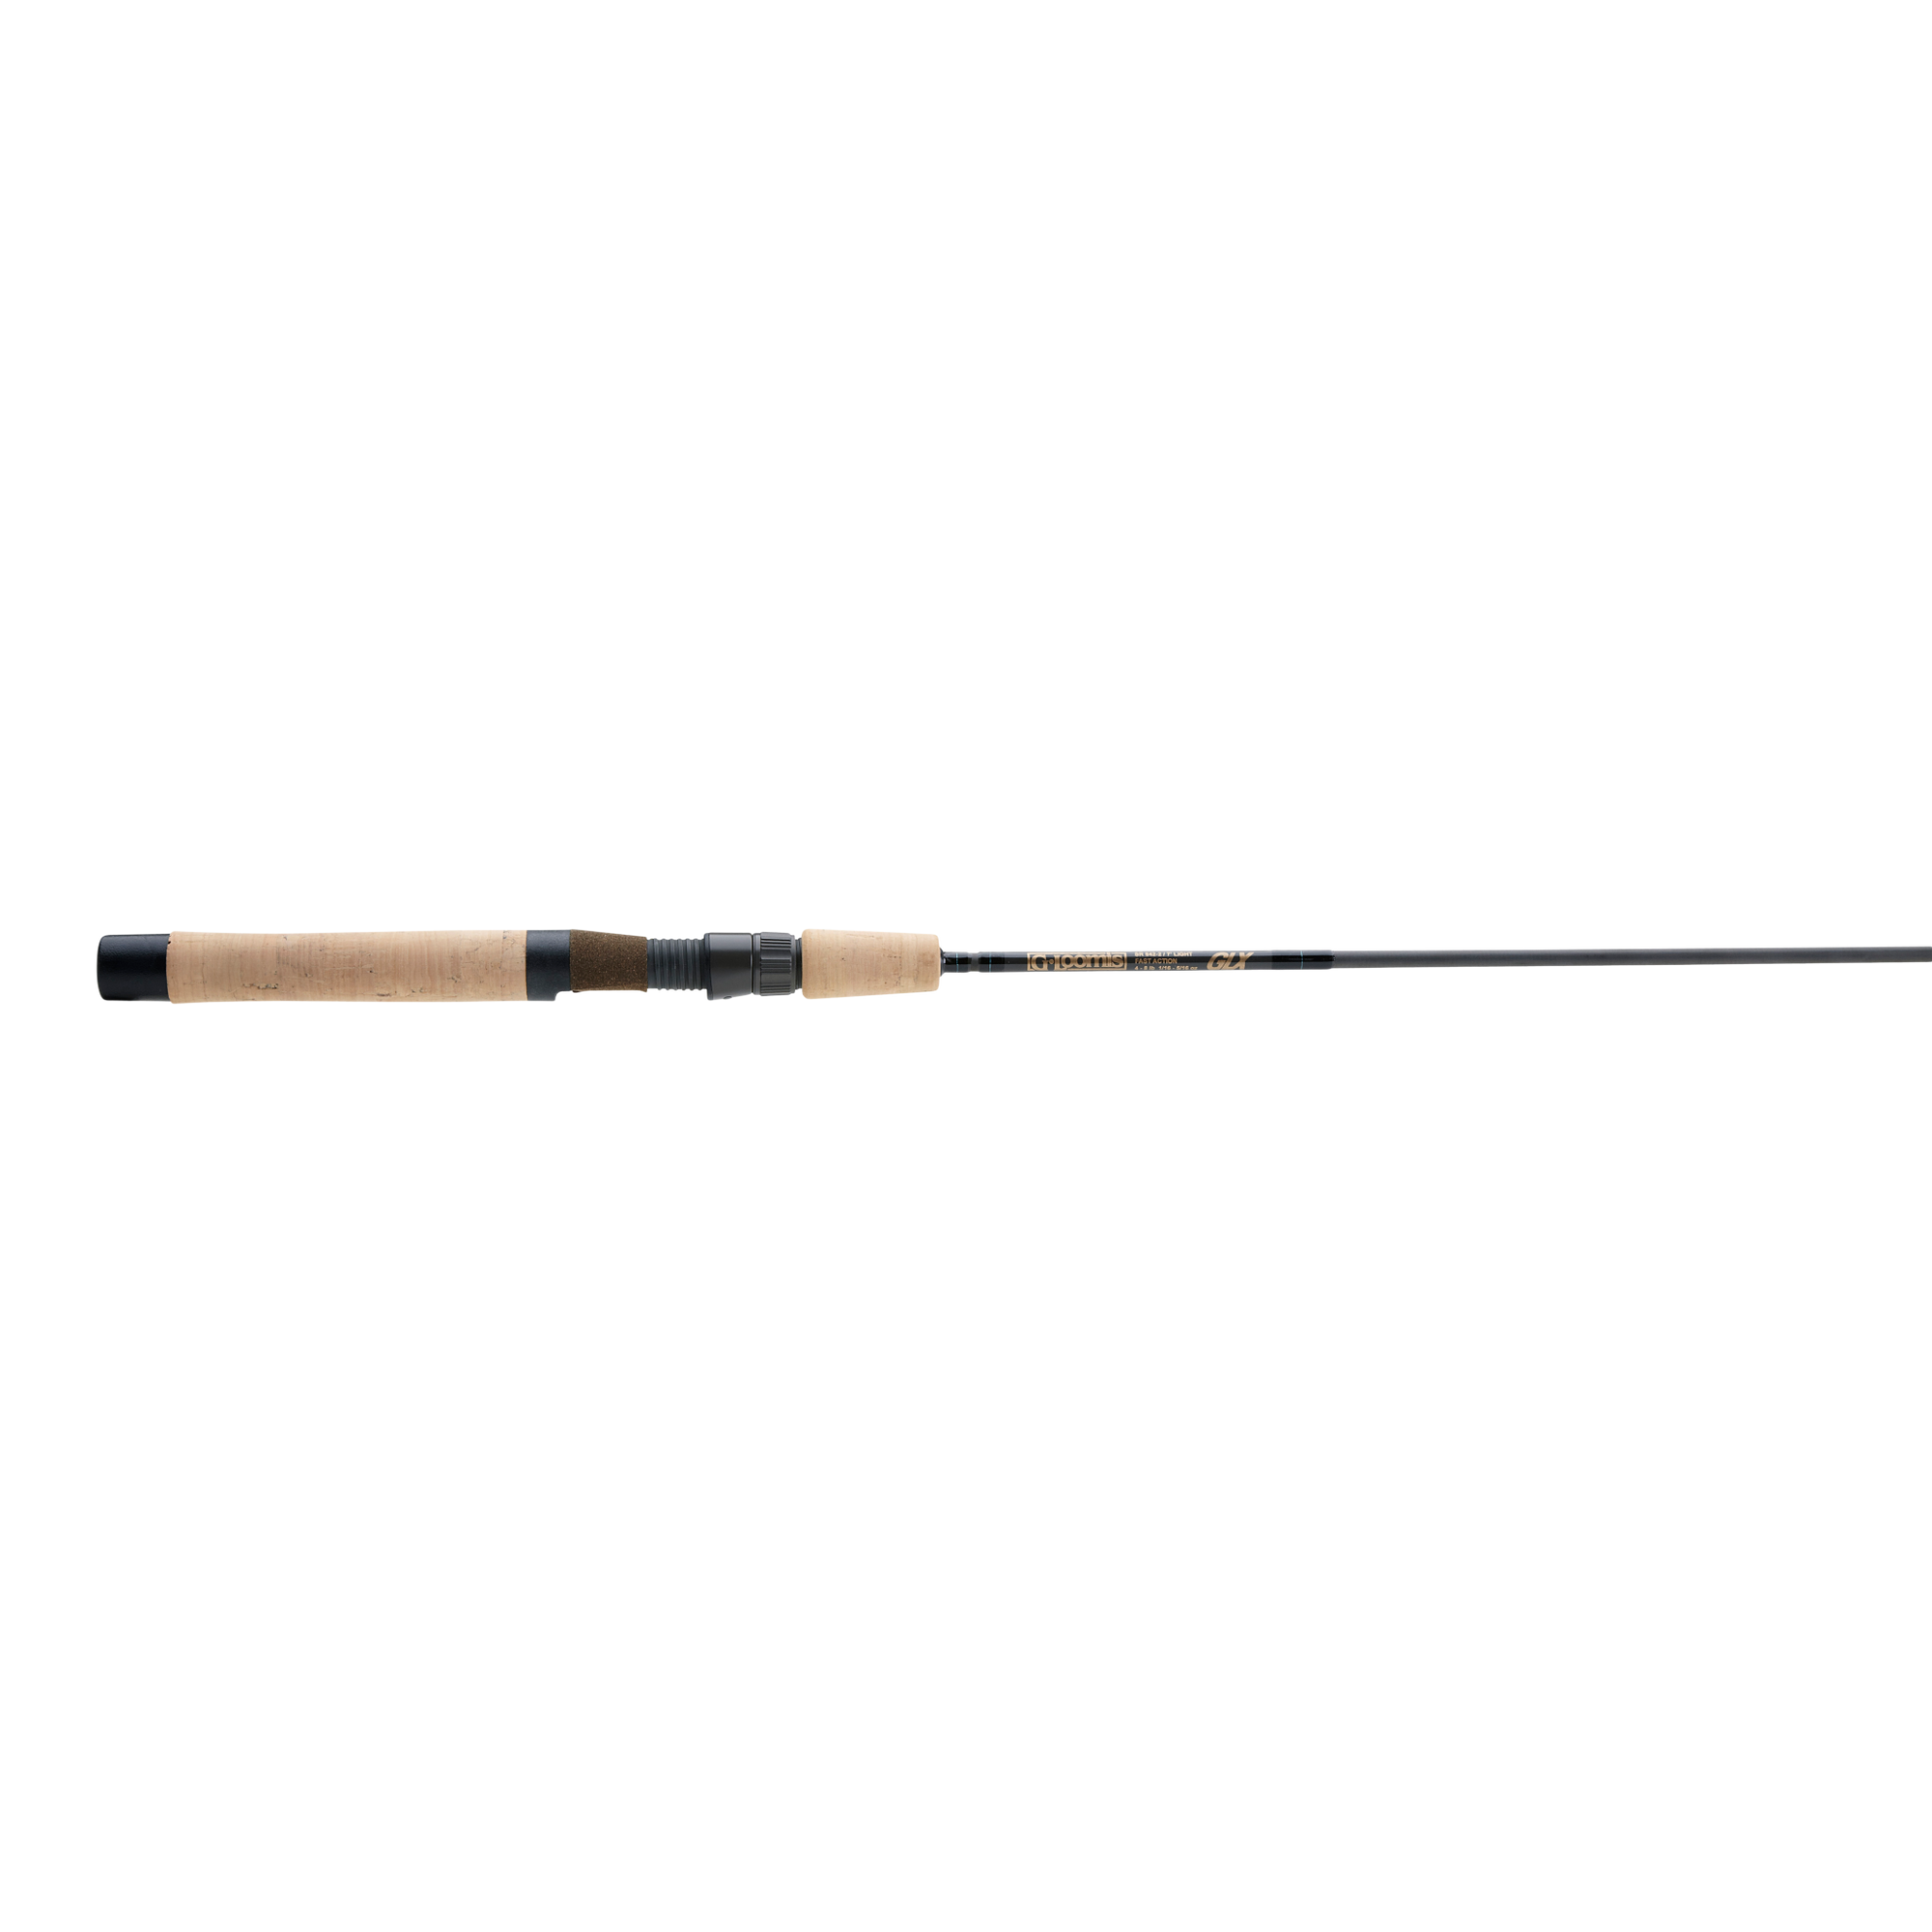 WEIZ 59 3-6LB Lightweight Trout Rods 2 Pieces Cork Handle Spinning Fishing  Rod.